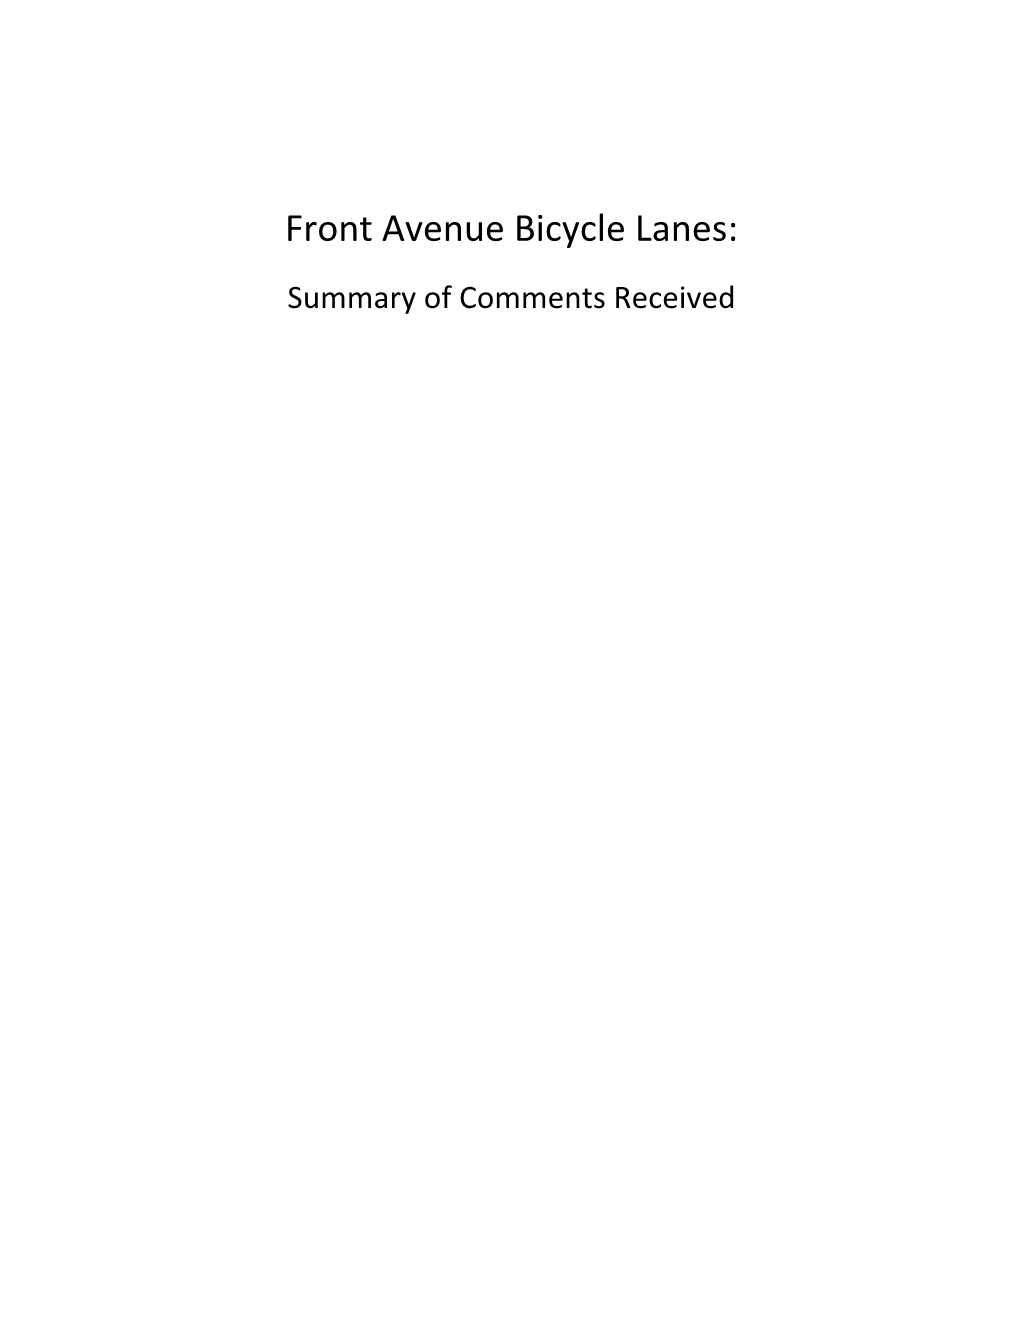 Front Avenue Bicycle Lanes